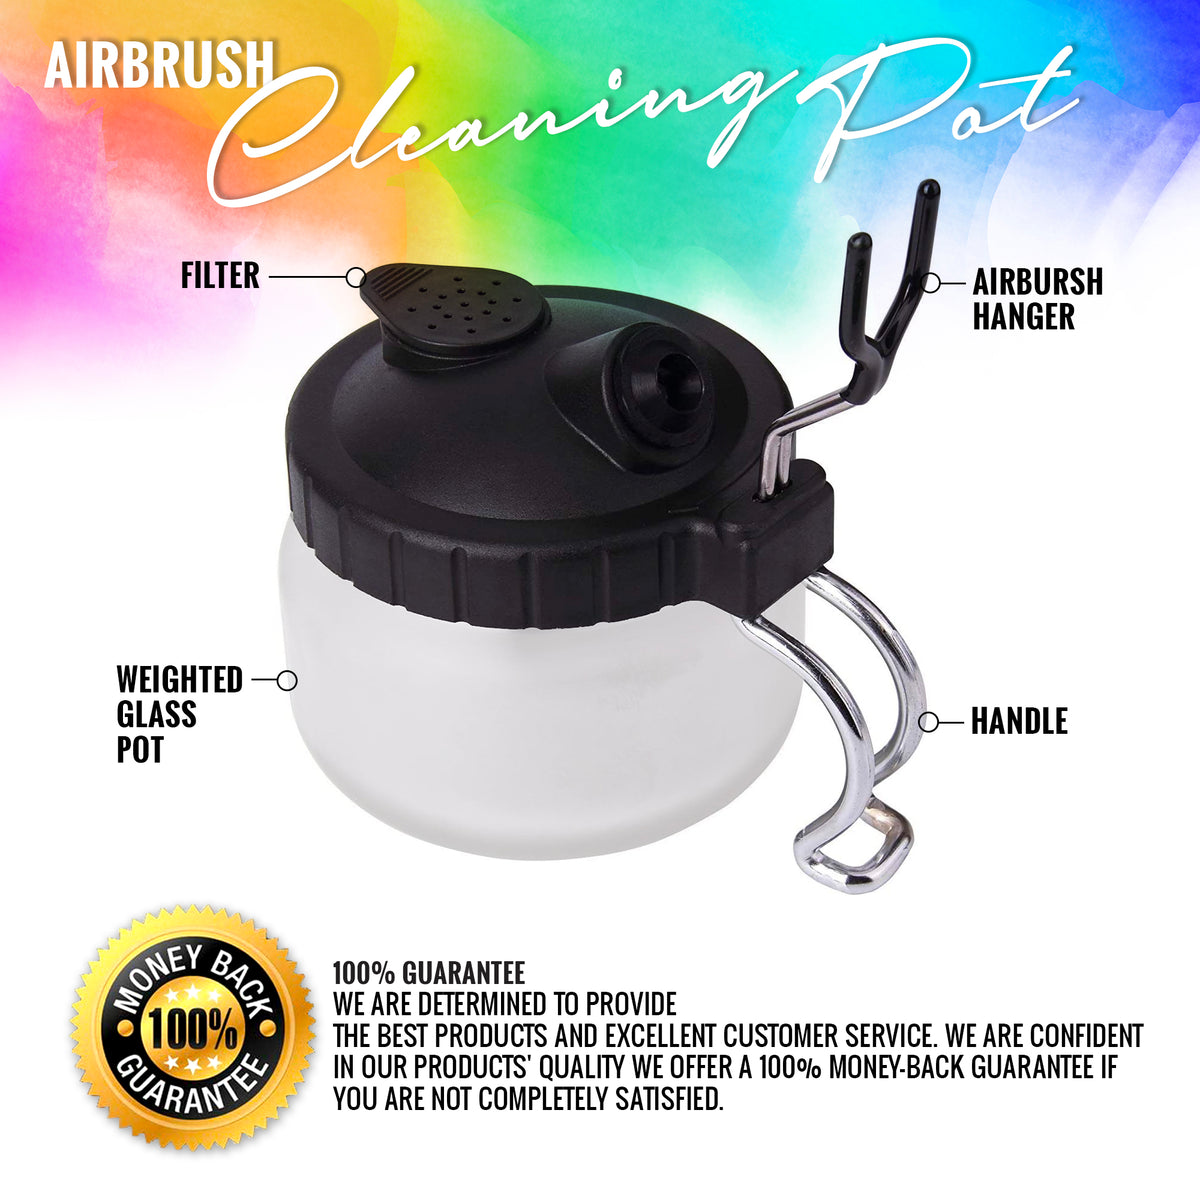 Acorn Models - Airbrush Cleaning Pot with Lid